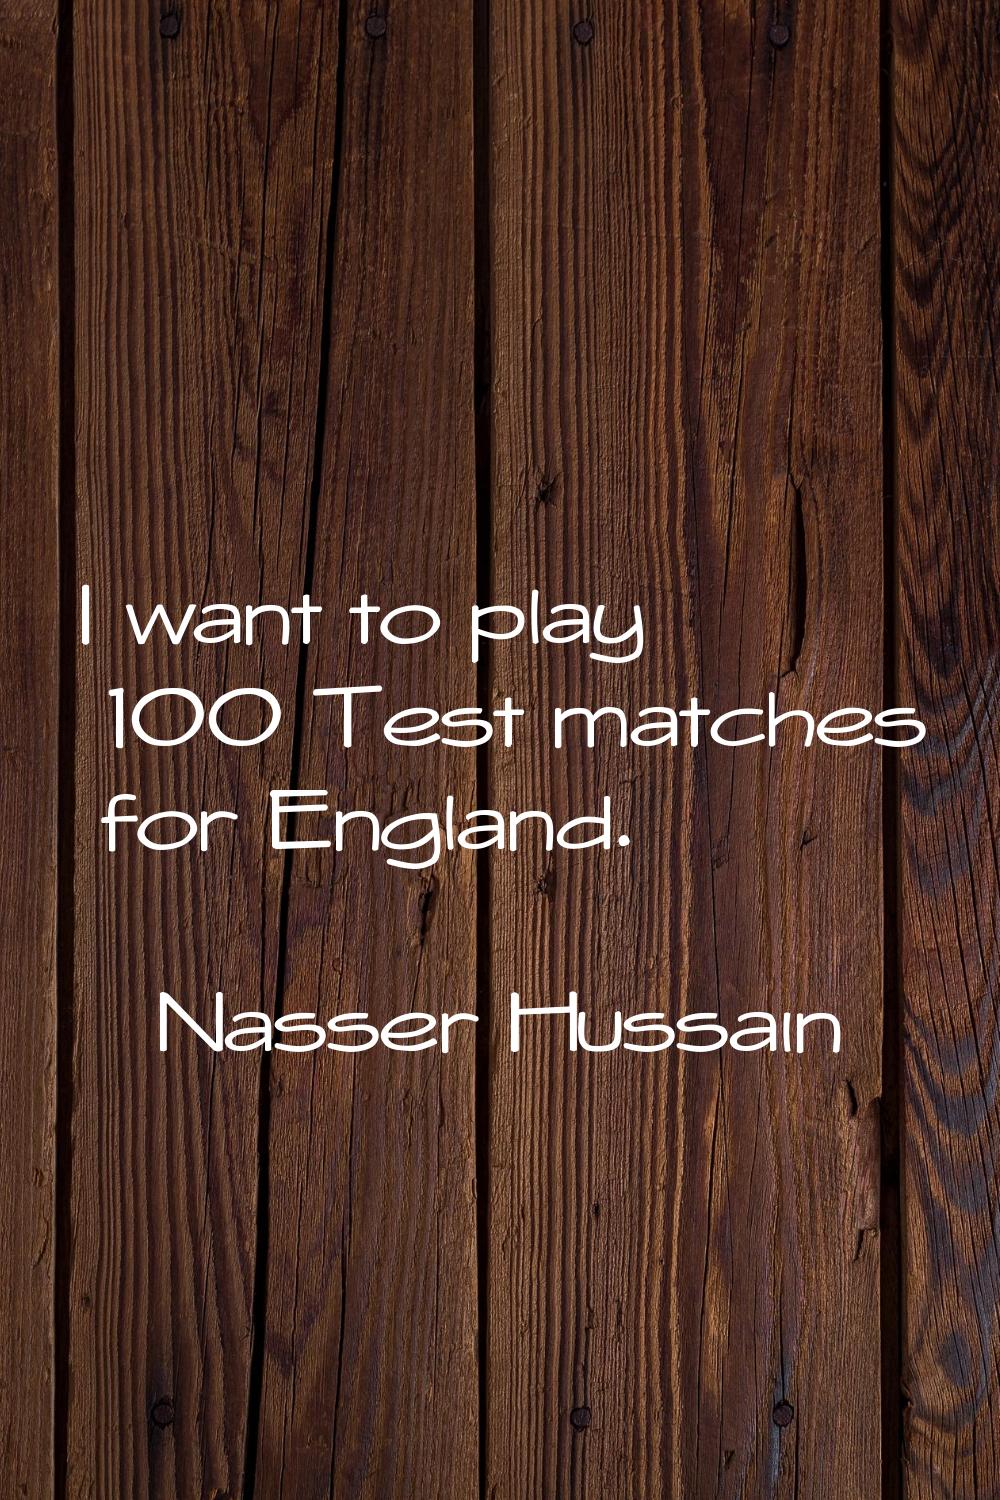 I want to play 100 Test matches for England.